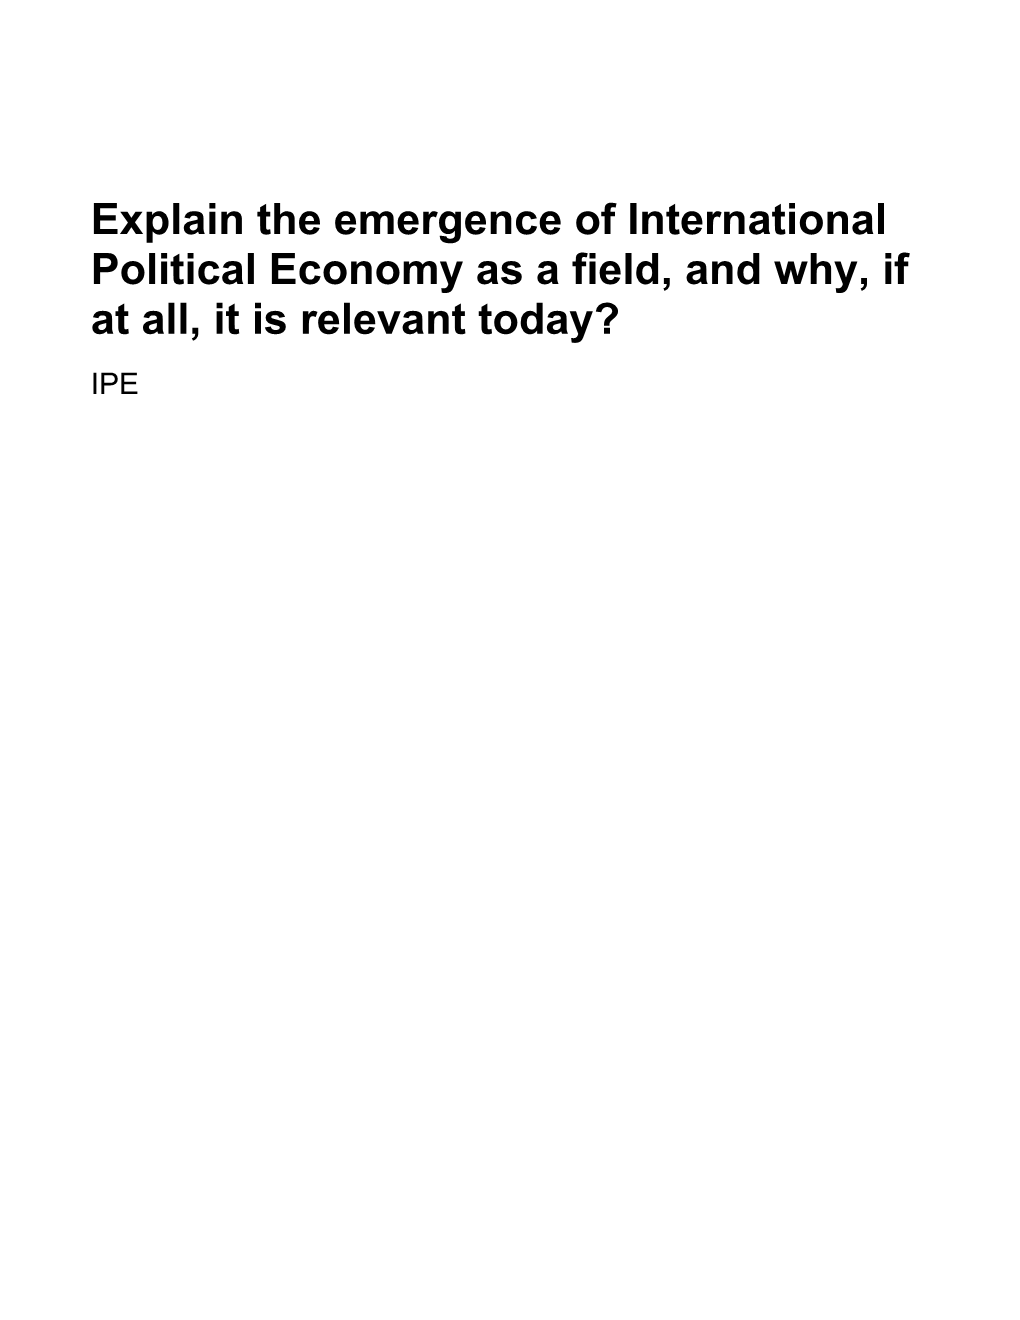 Explain the Emergence of International Political Economy As a Field, and Why, If at All